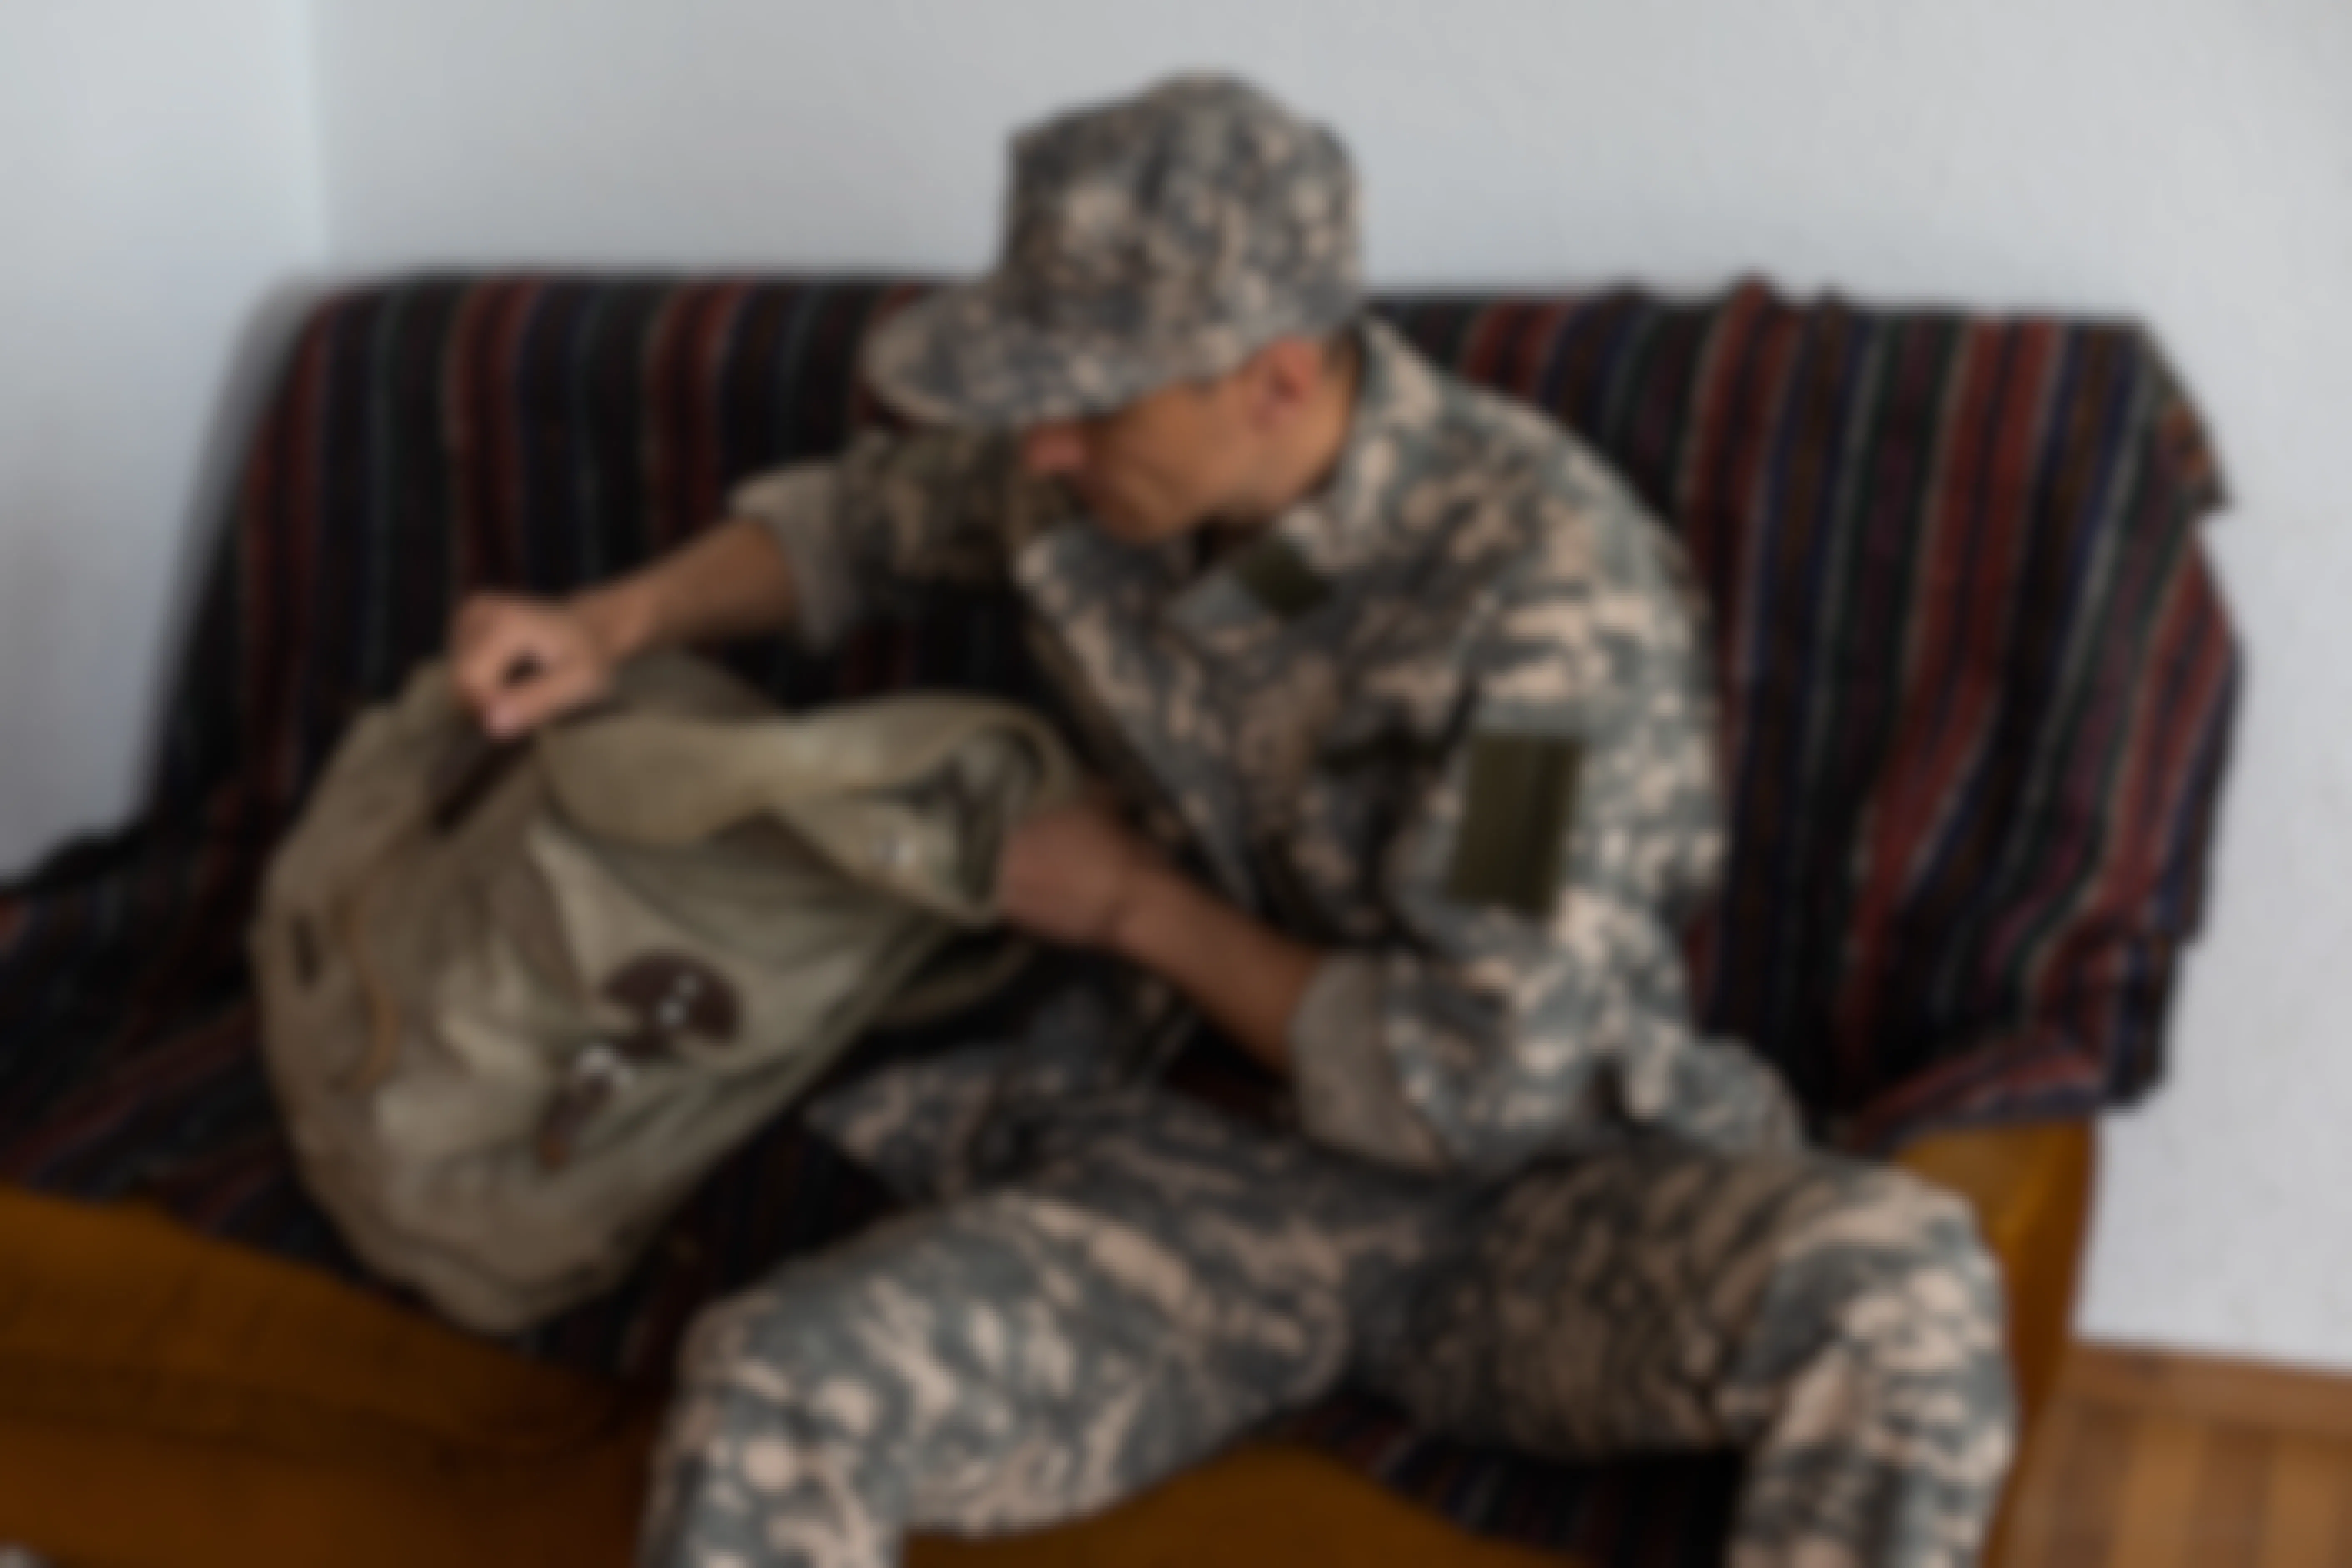 Person packing a bag in a military uniform